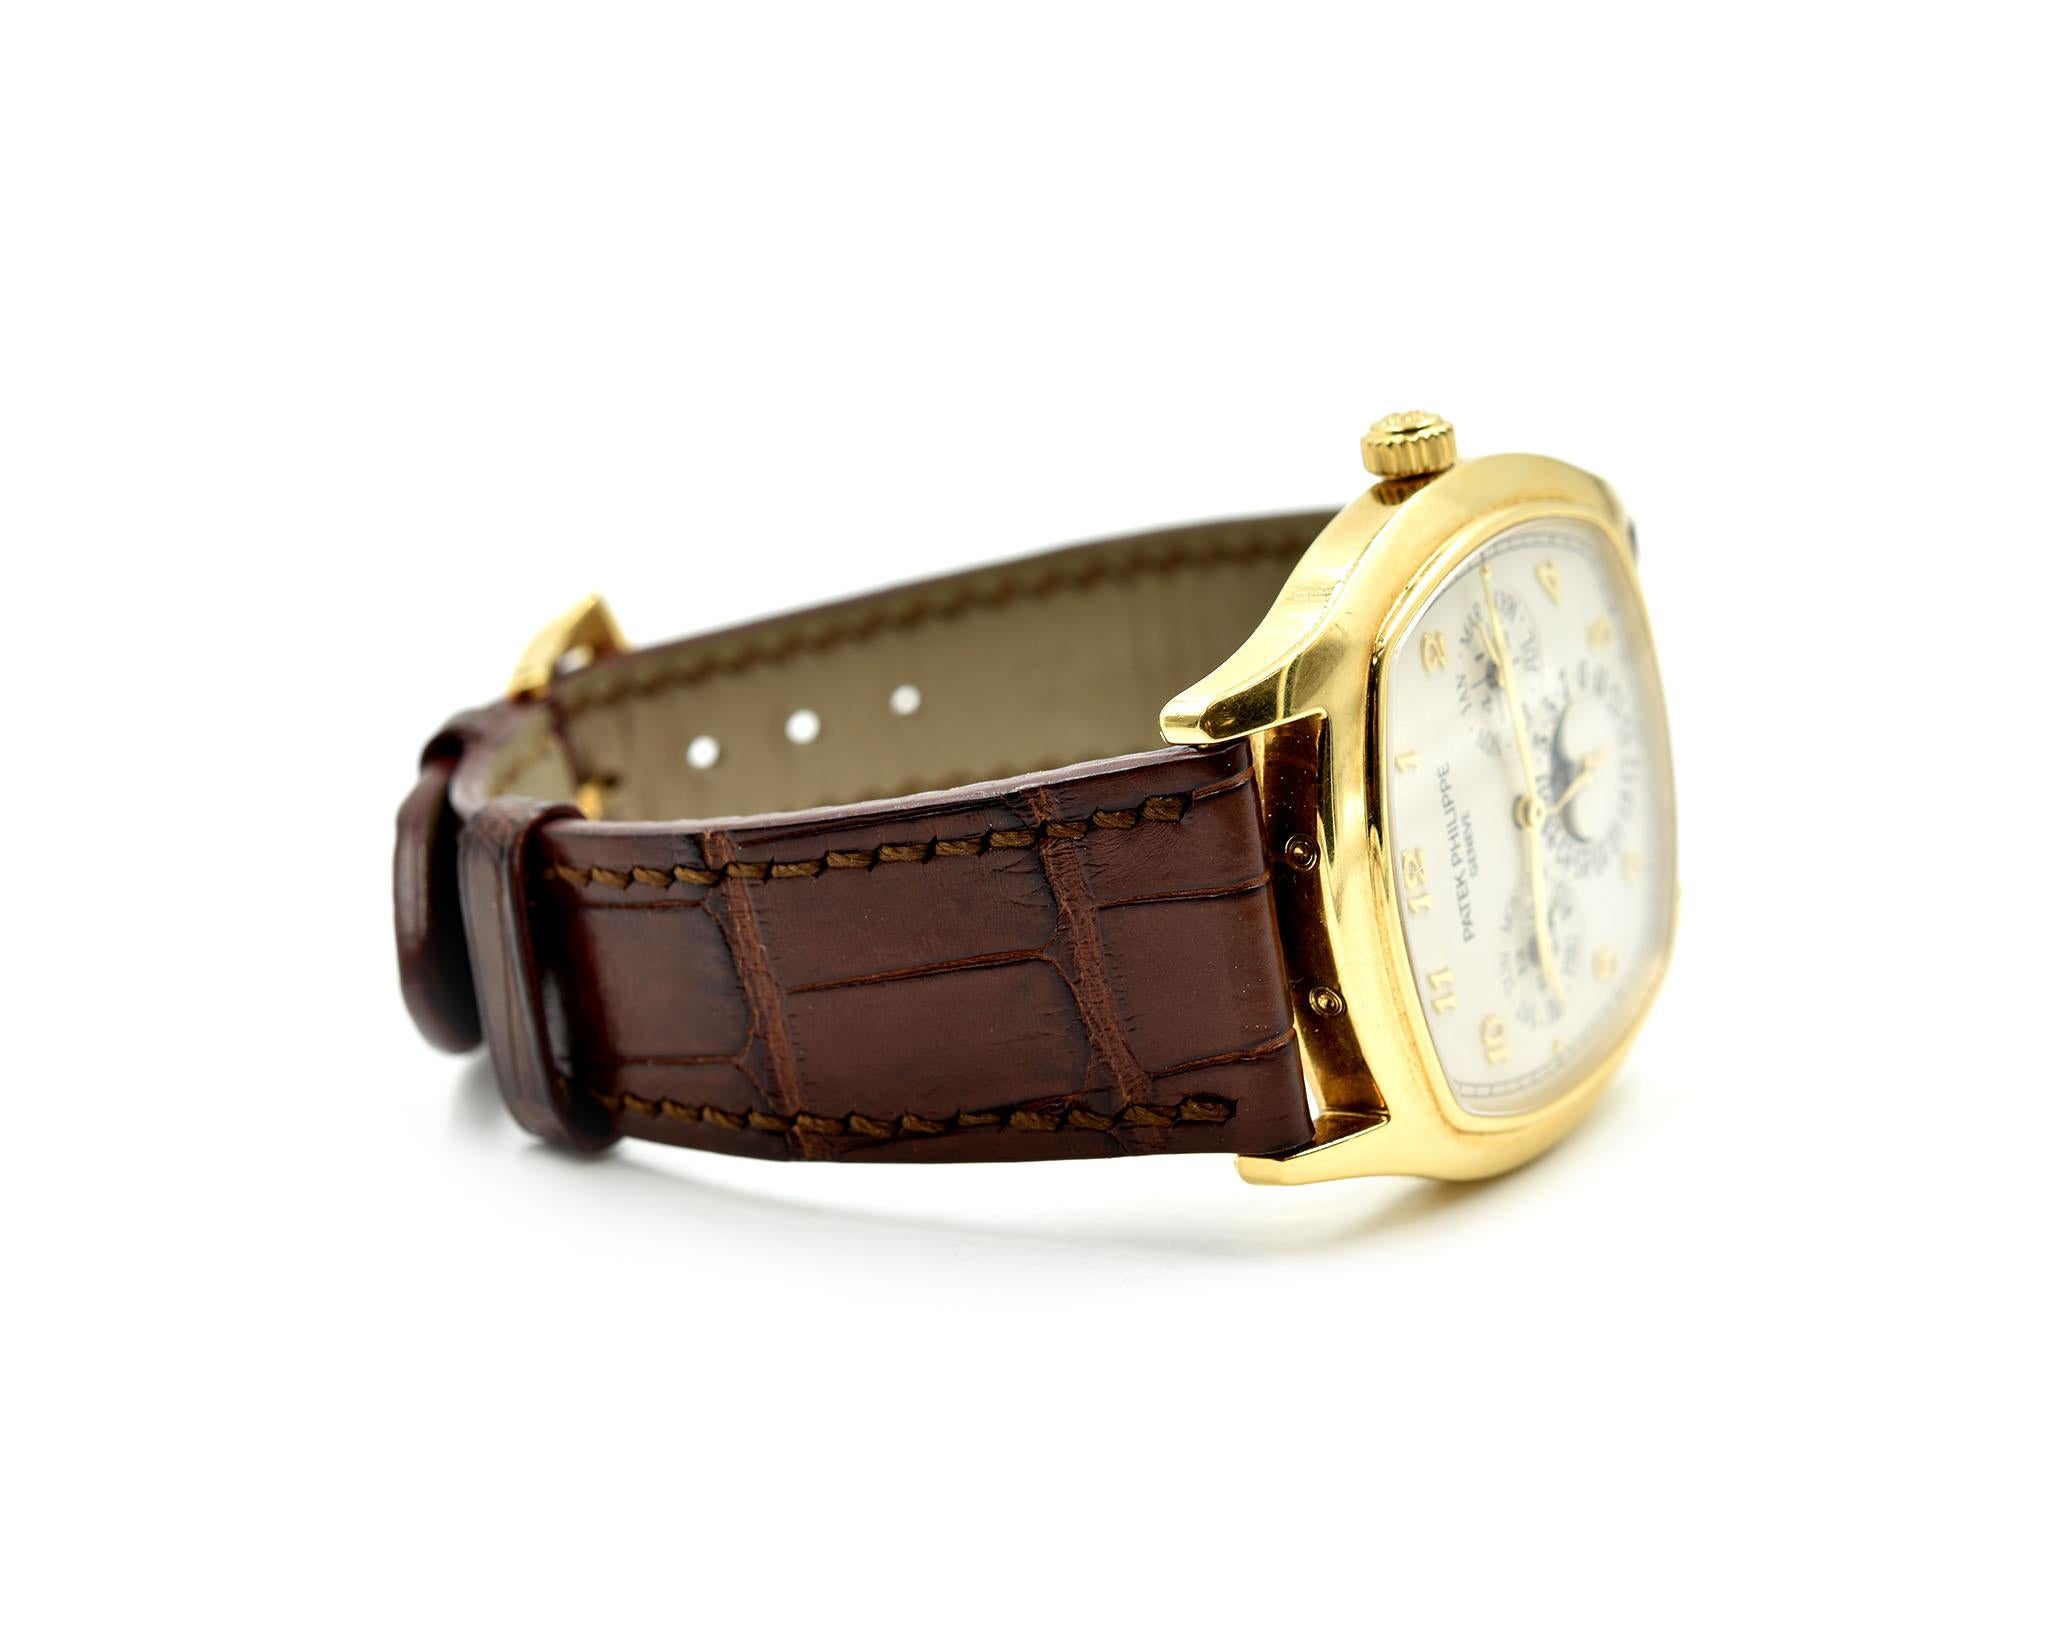 Patek Philippe Grand Complications Cream Dial 18k Gold Wristwatch Ref 5940J-001 In Excellent Condition In Scottsdale, AZ